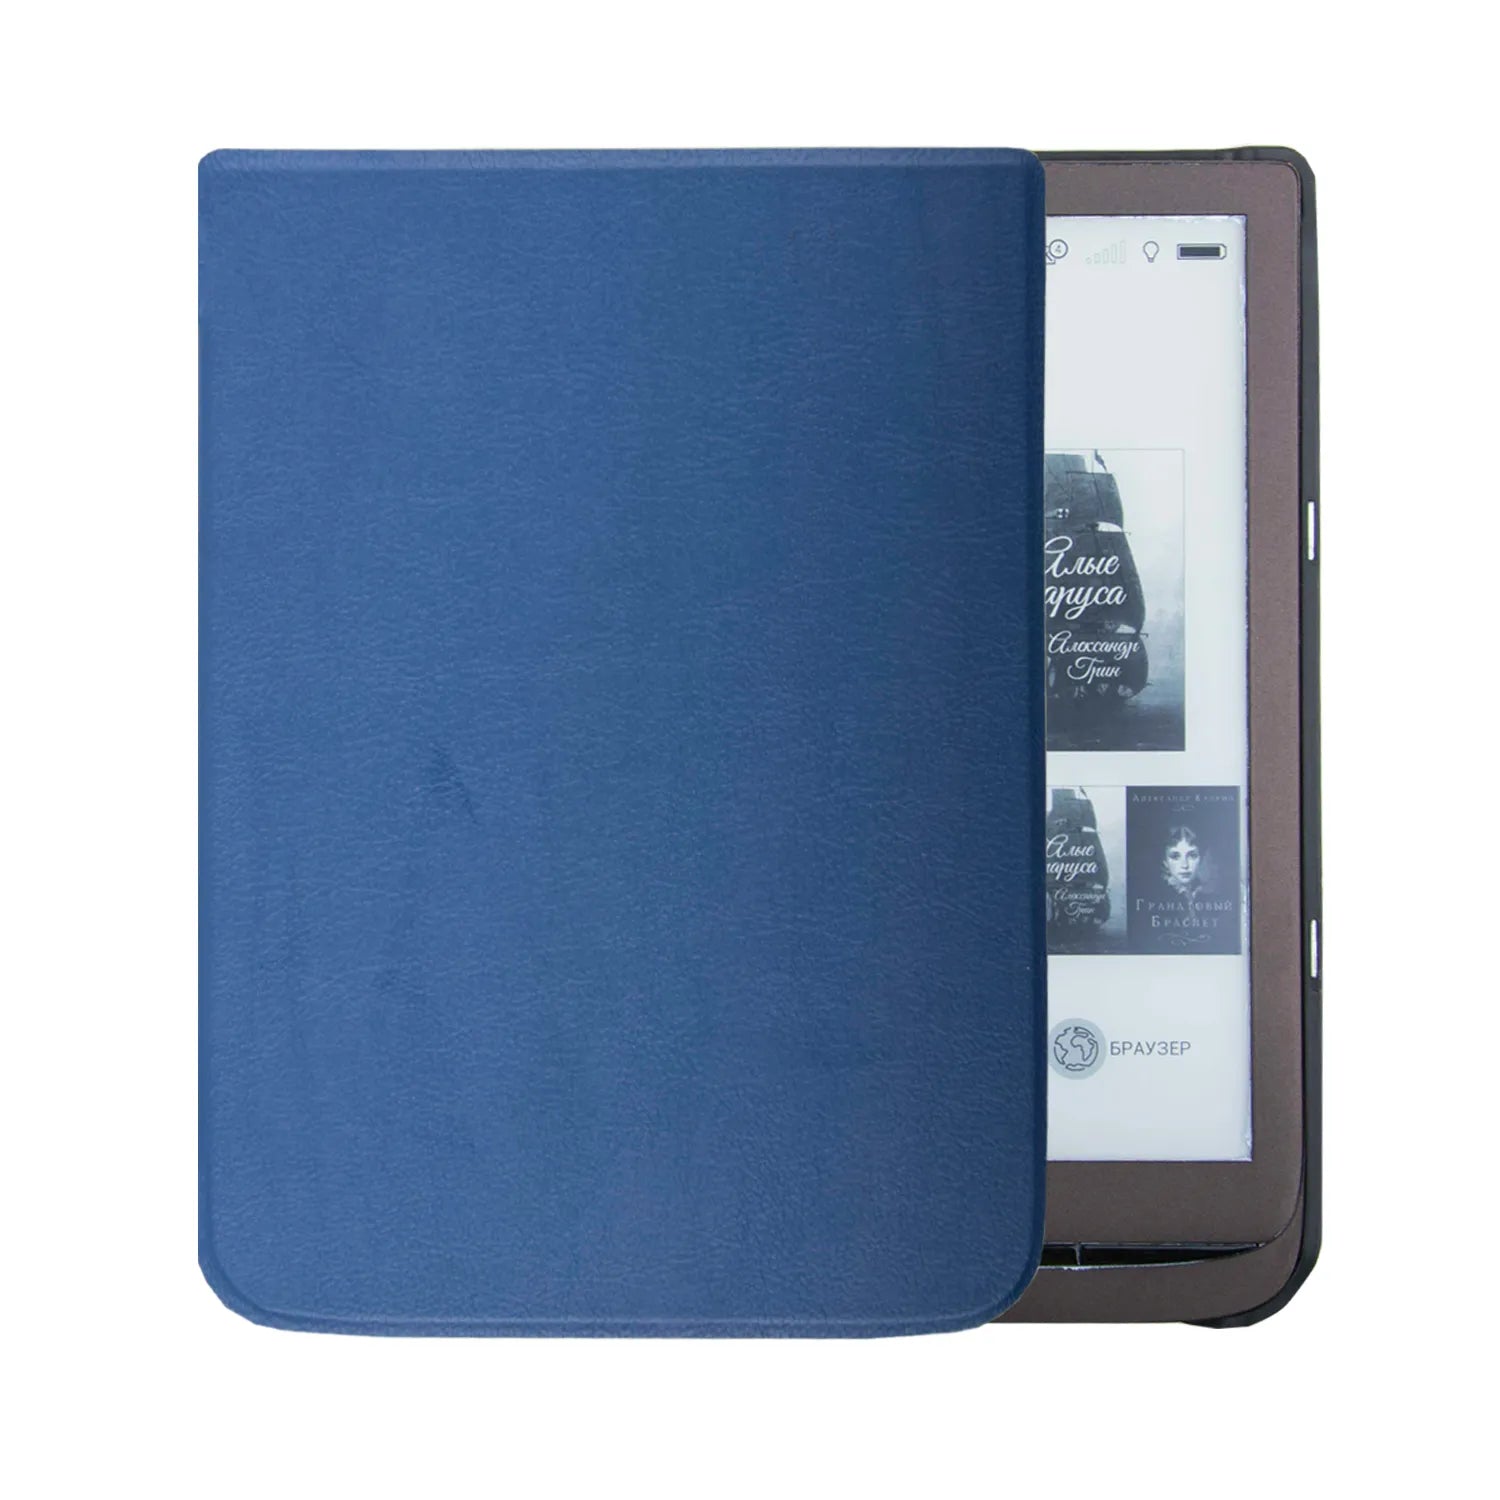 Cover Case For Pocketbook 740 7.8 Inch E-Book 740 Inkpad 3 Smart Protective Shell For Pocketbook 740 Inkpad 3 Pro 2019 Case